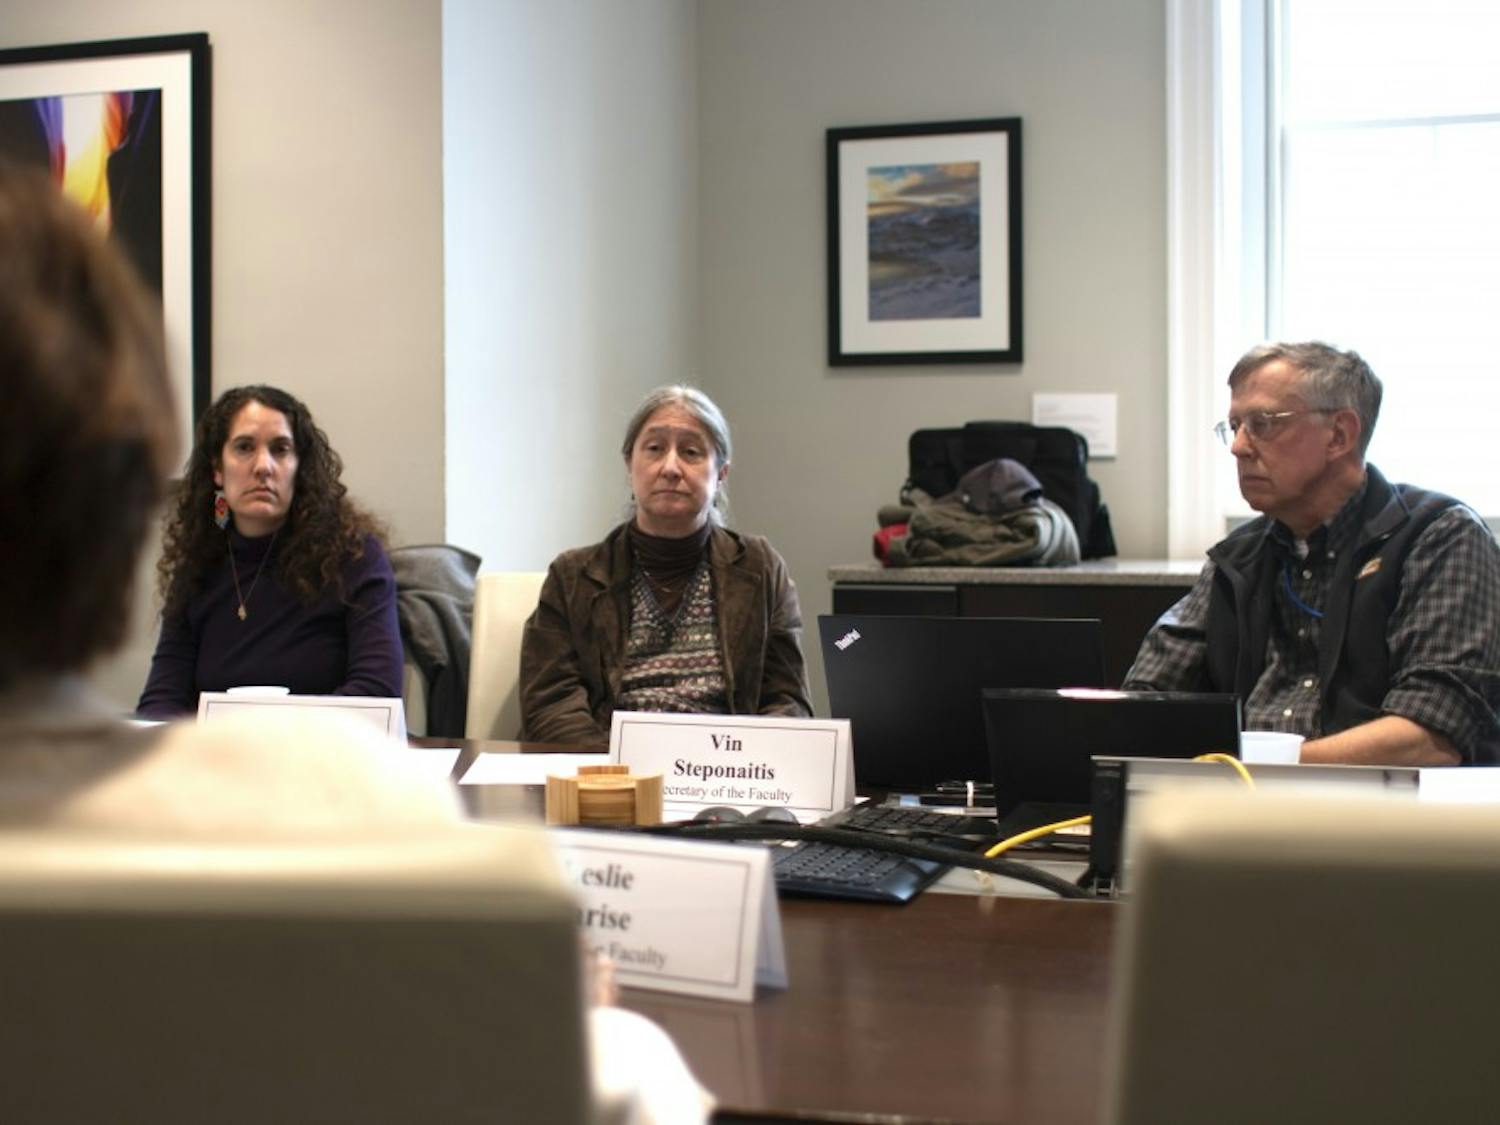 (From left) Ariana Vigil, Laurie McNeil and Secretary of the Faculty Vin Steponaitis, consider a point presented by Chair of the Faculty &nbsp;Leslie Parise regarding a revision of the Chancellor Advisory Committee's charge during a meeting in South Building on Wednesday, March 20, 2019. The revision concerned the committee's power to nominate candidates for Secretary and Chair of the Faculty.